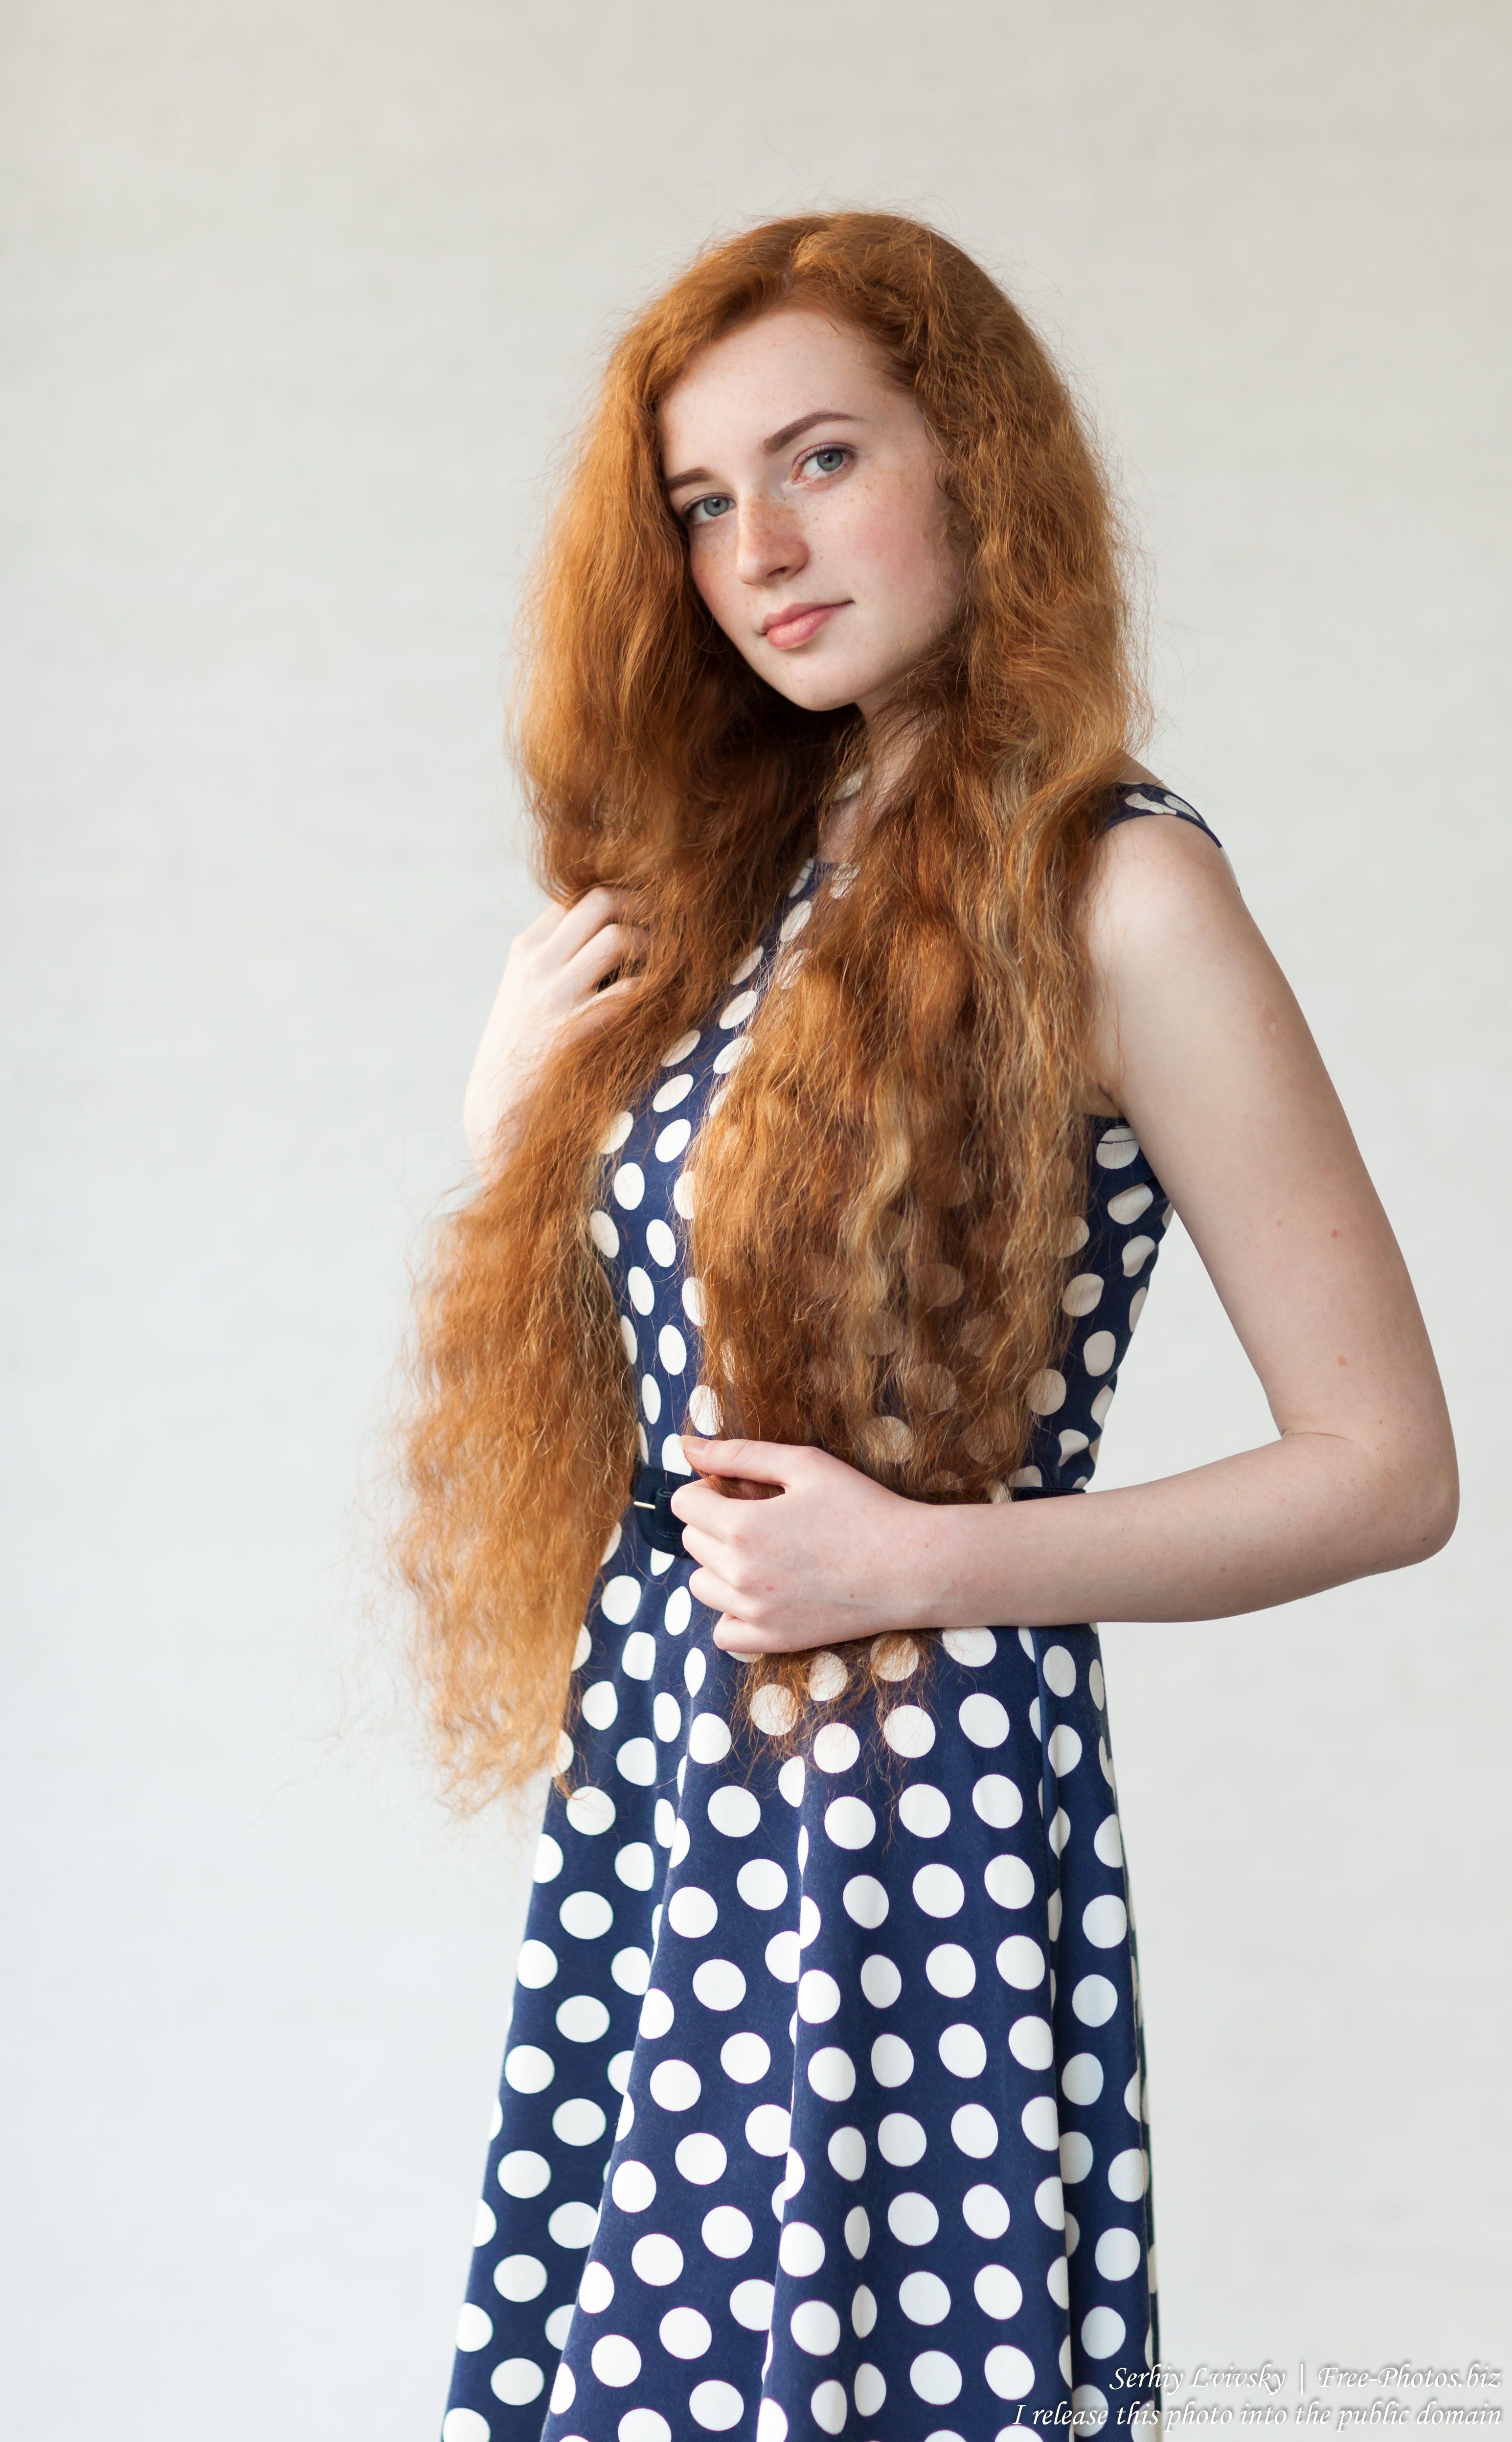 Ania - a 19-year-old natural red-haired girl photographed in June 2017 by Serhiy Lvivsky, picture 10